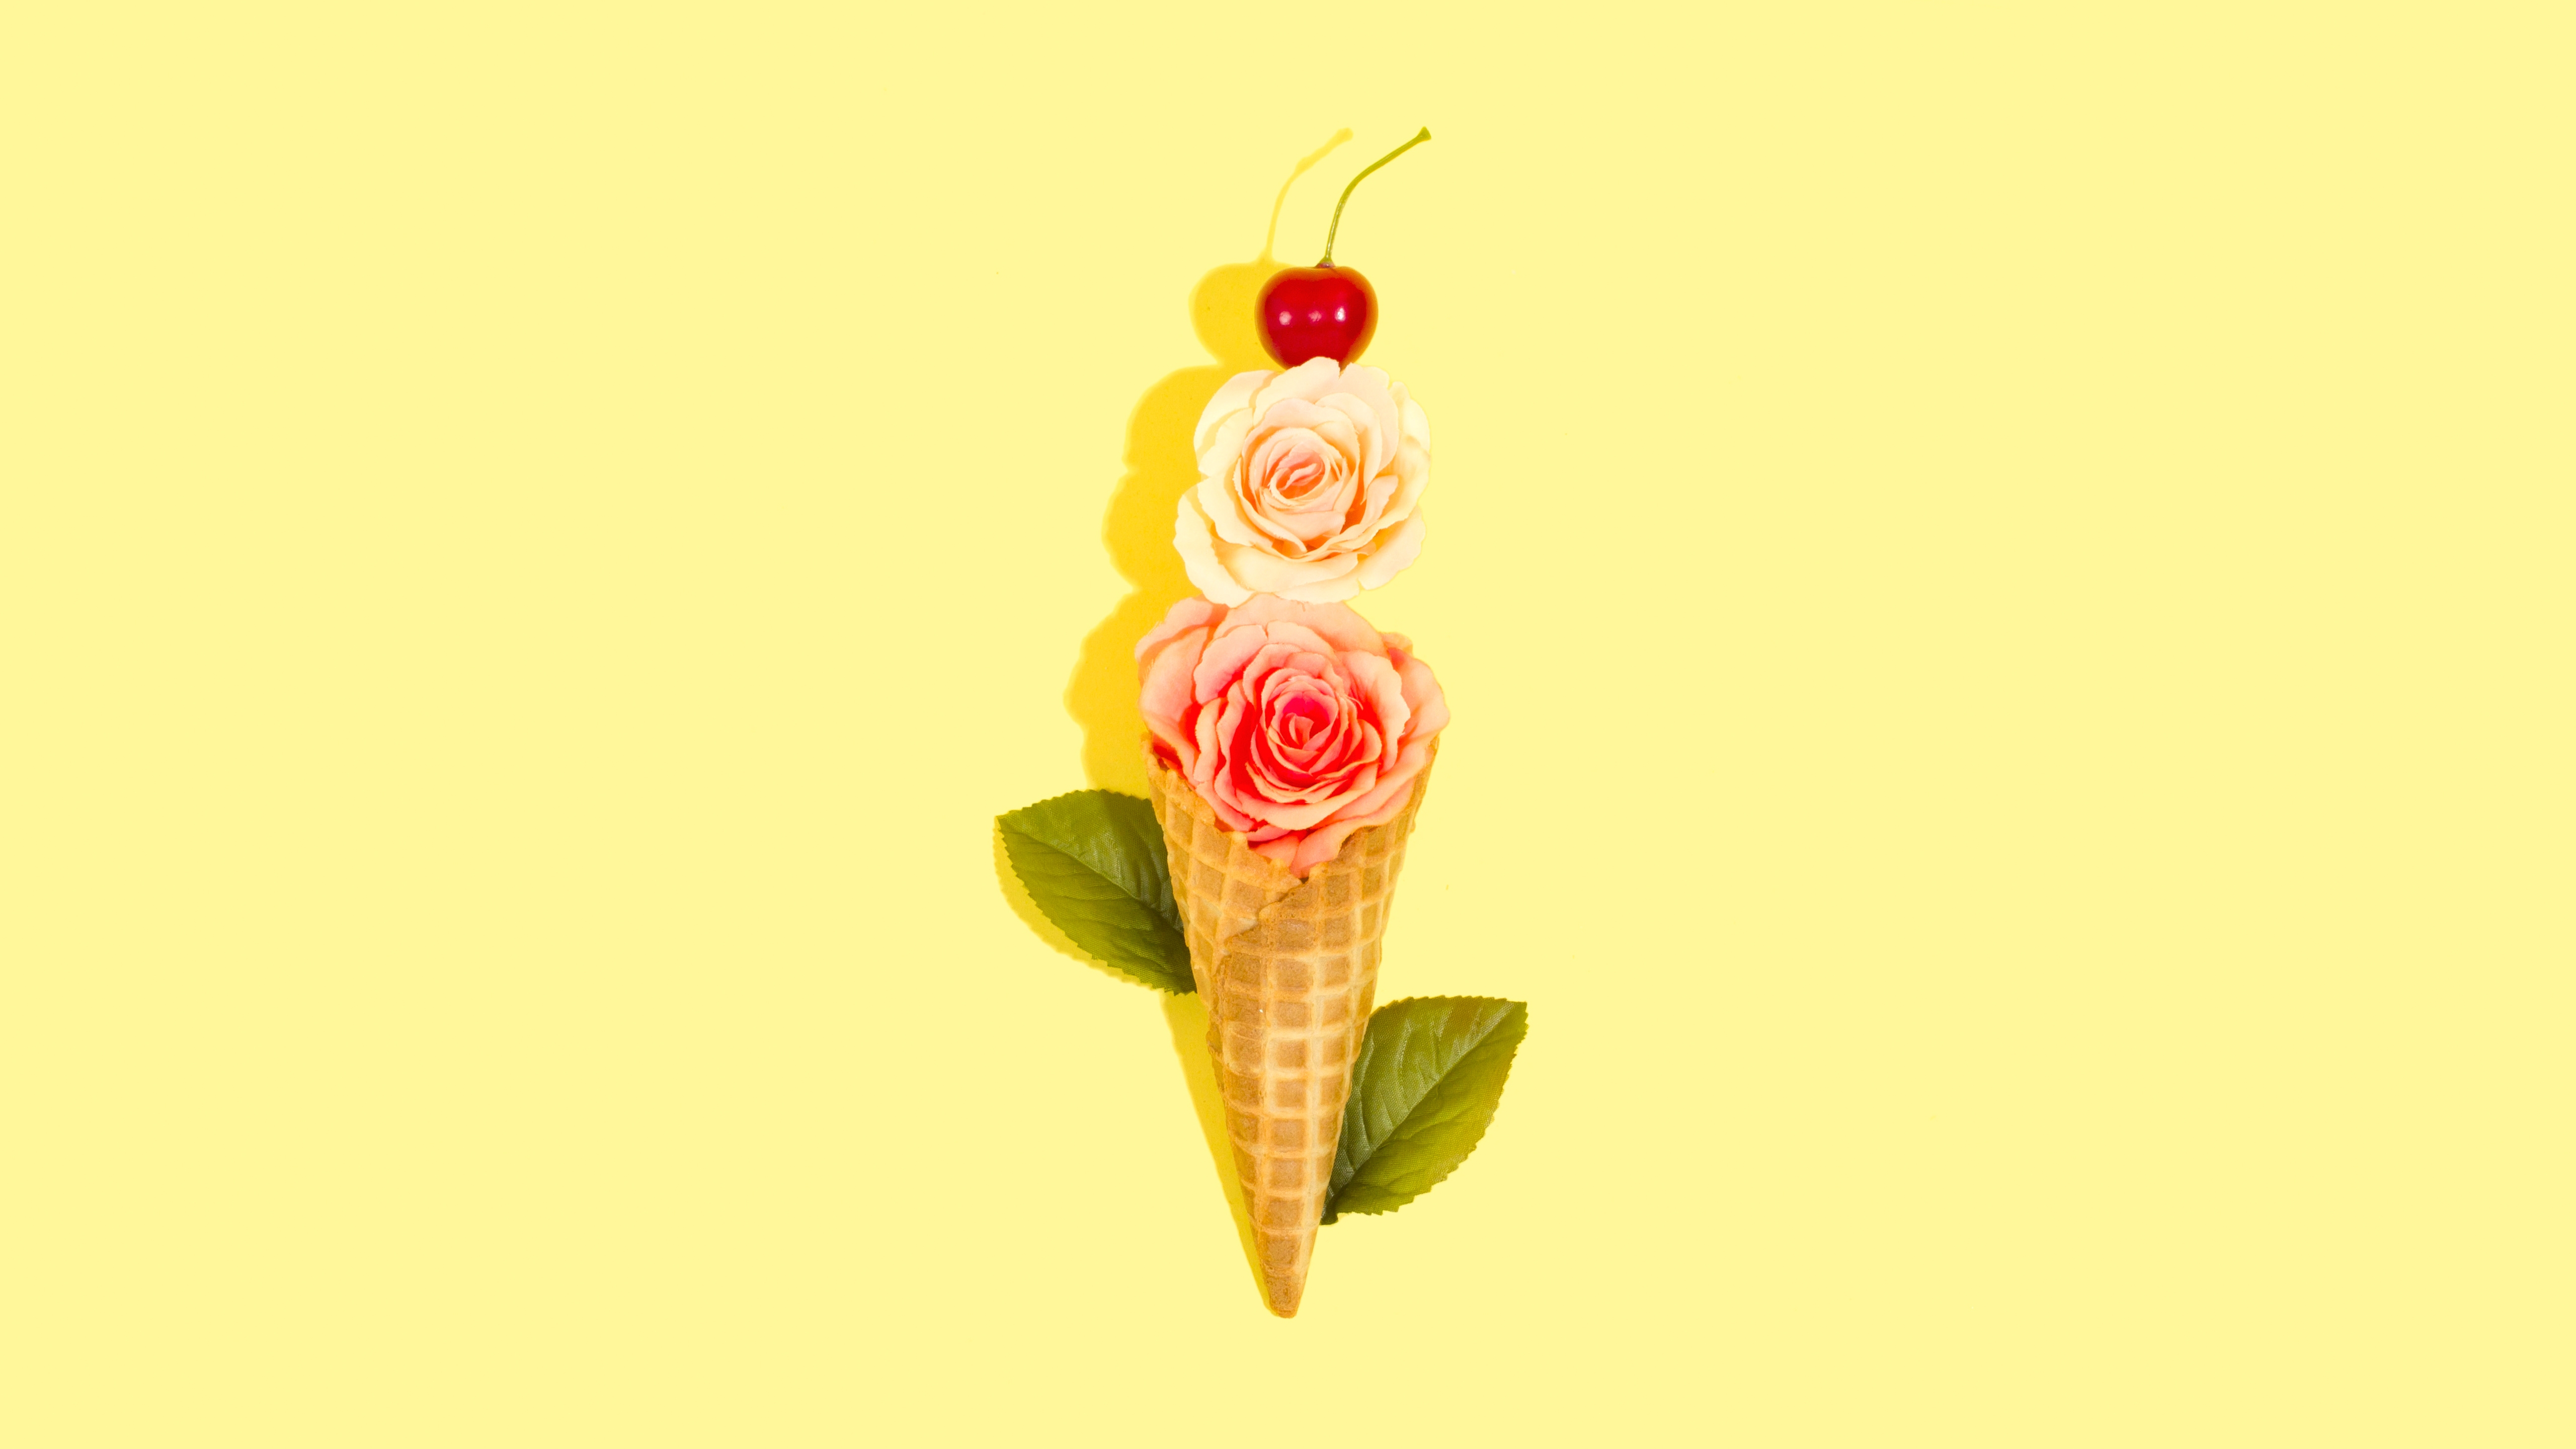 HD wallpaper, Cherry Fruits, Ice Cream Cone, Yellow Background, 5K, Rose Flowers, Leaves